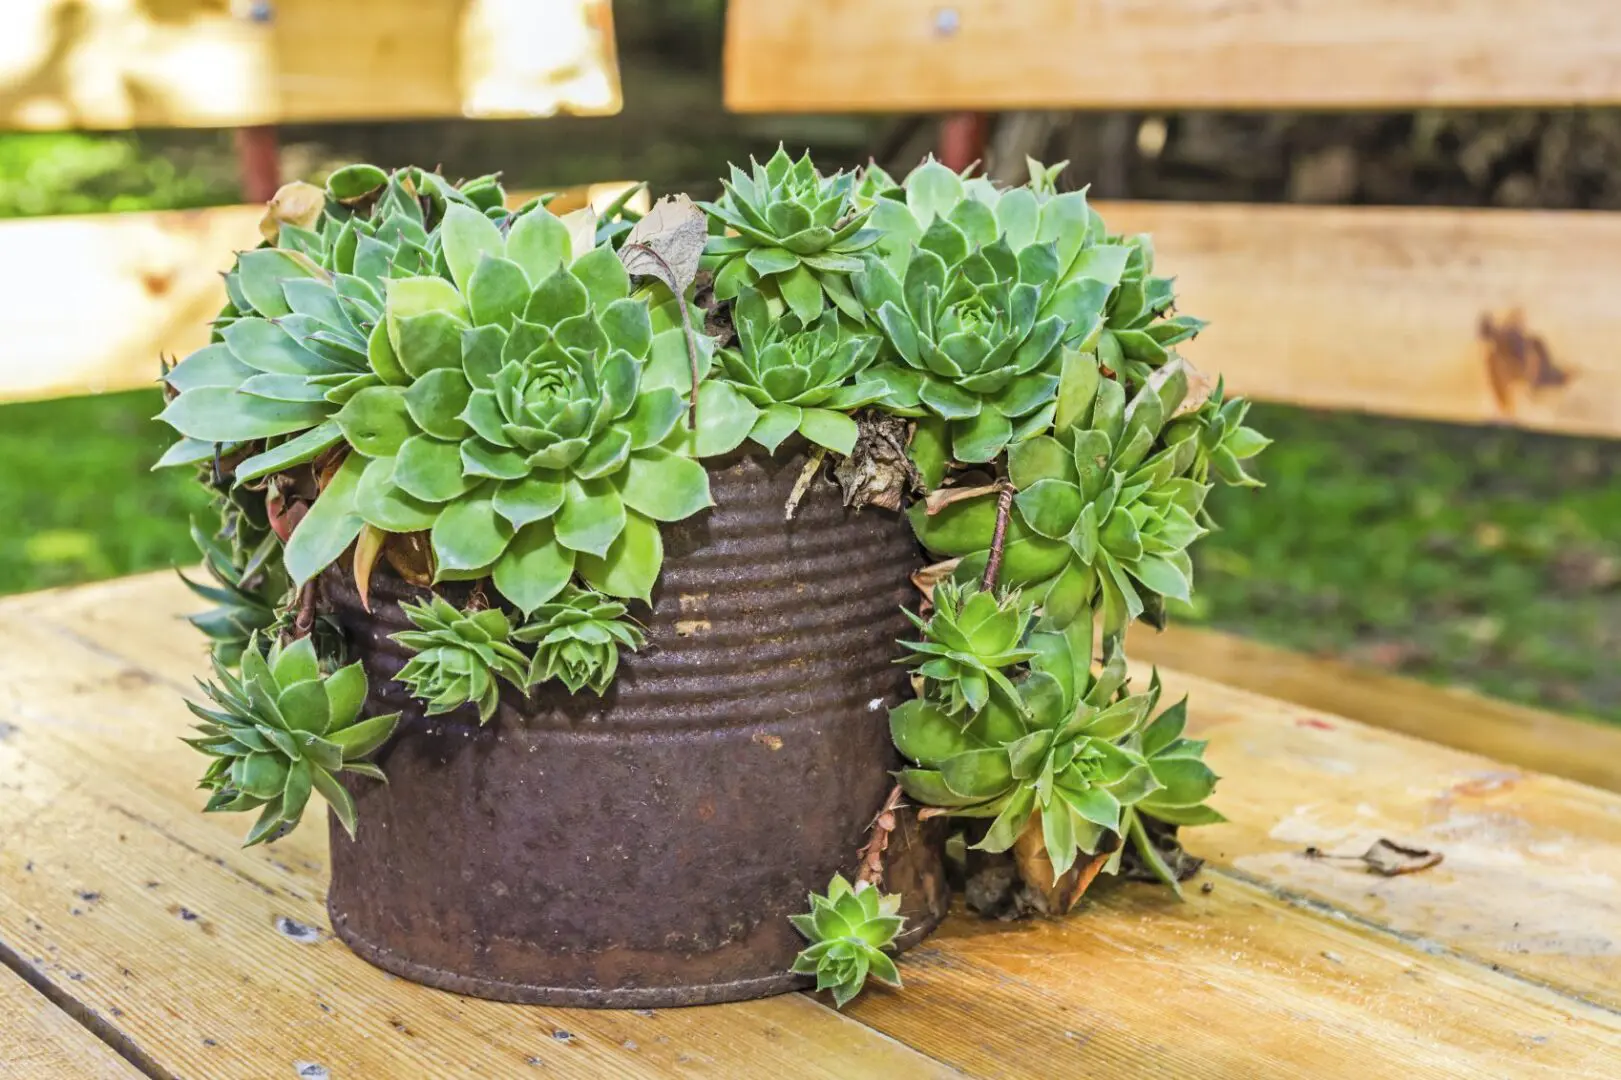 A succulent plant in a container